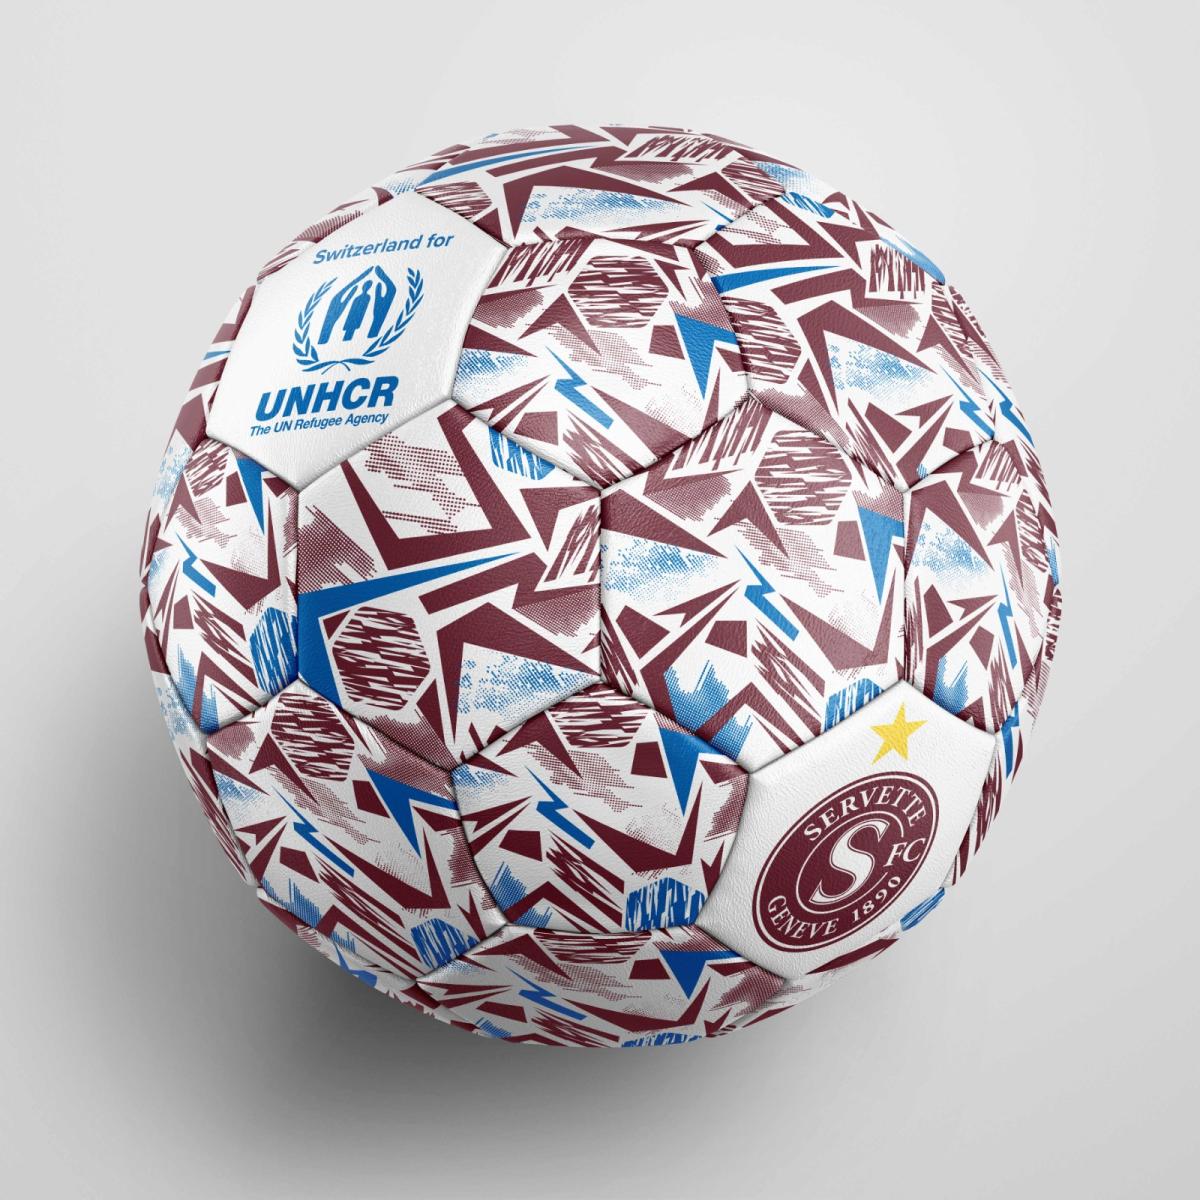 Proceeds from the football sales will be donated to UNHCR to help people forced to flee in Ukraine.